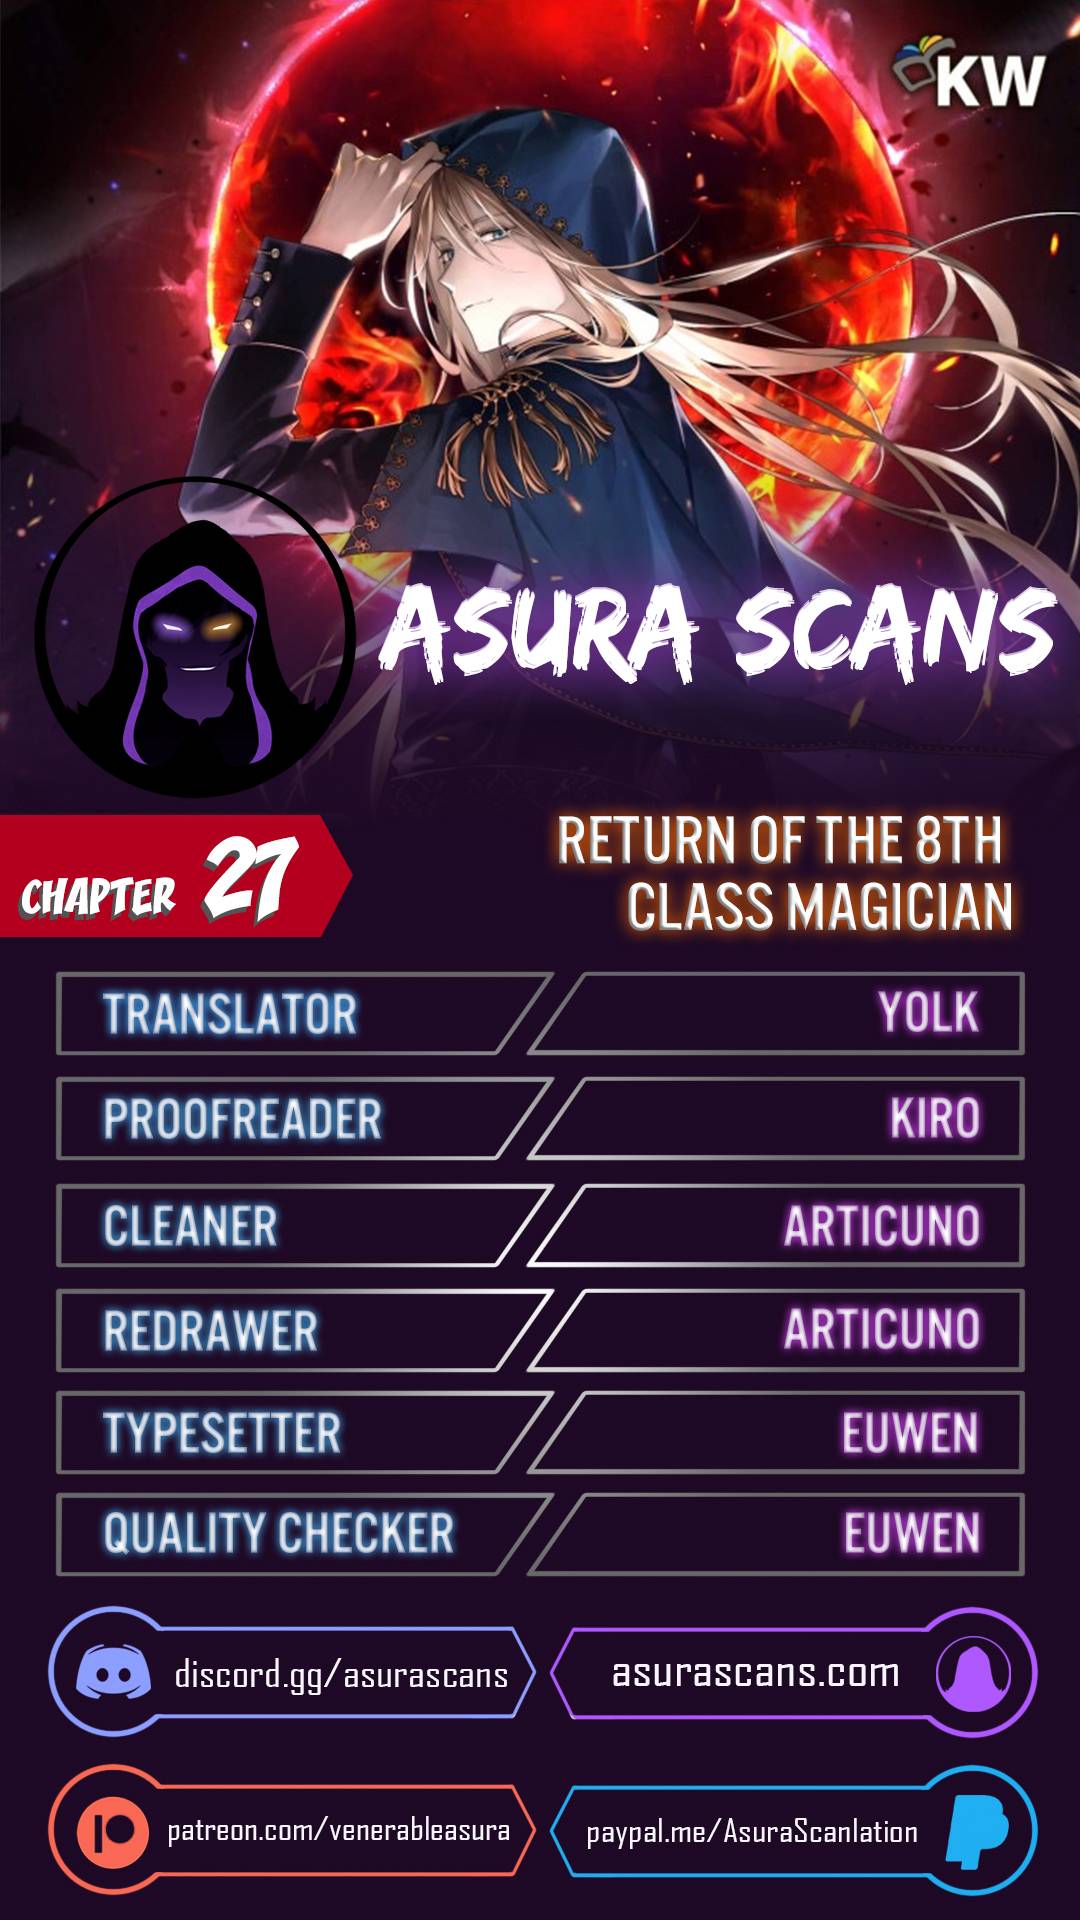 Return of the 8th class Magician chapter 27